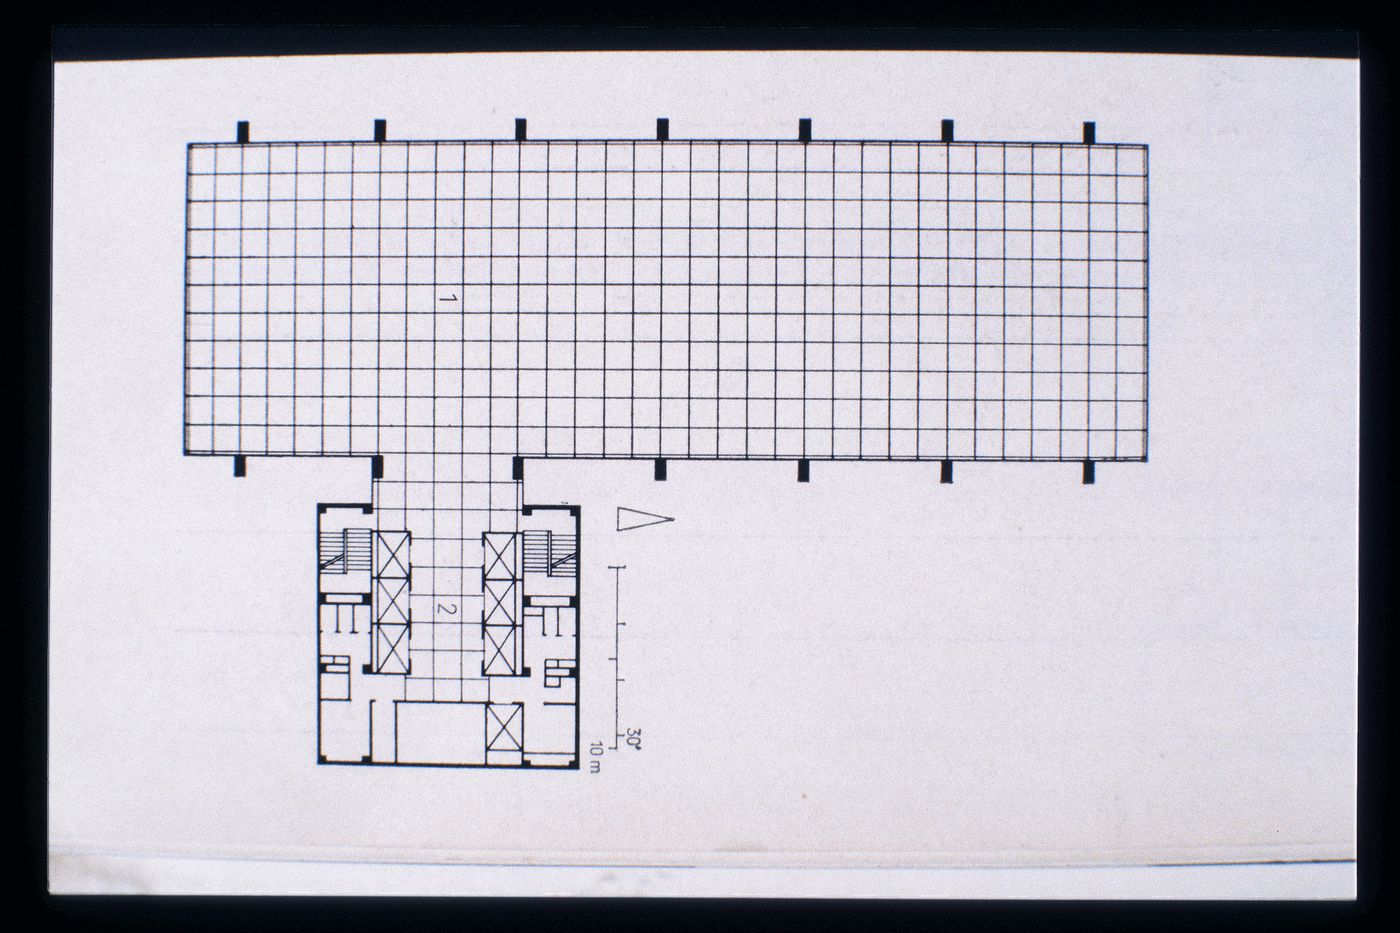 Slide of a drawing for Inland Steel Building, Chicago, by Bruce Graham, Walter Netsch and Fazlur Khan / SOM